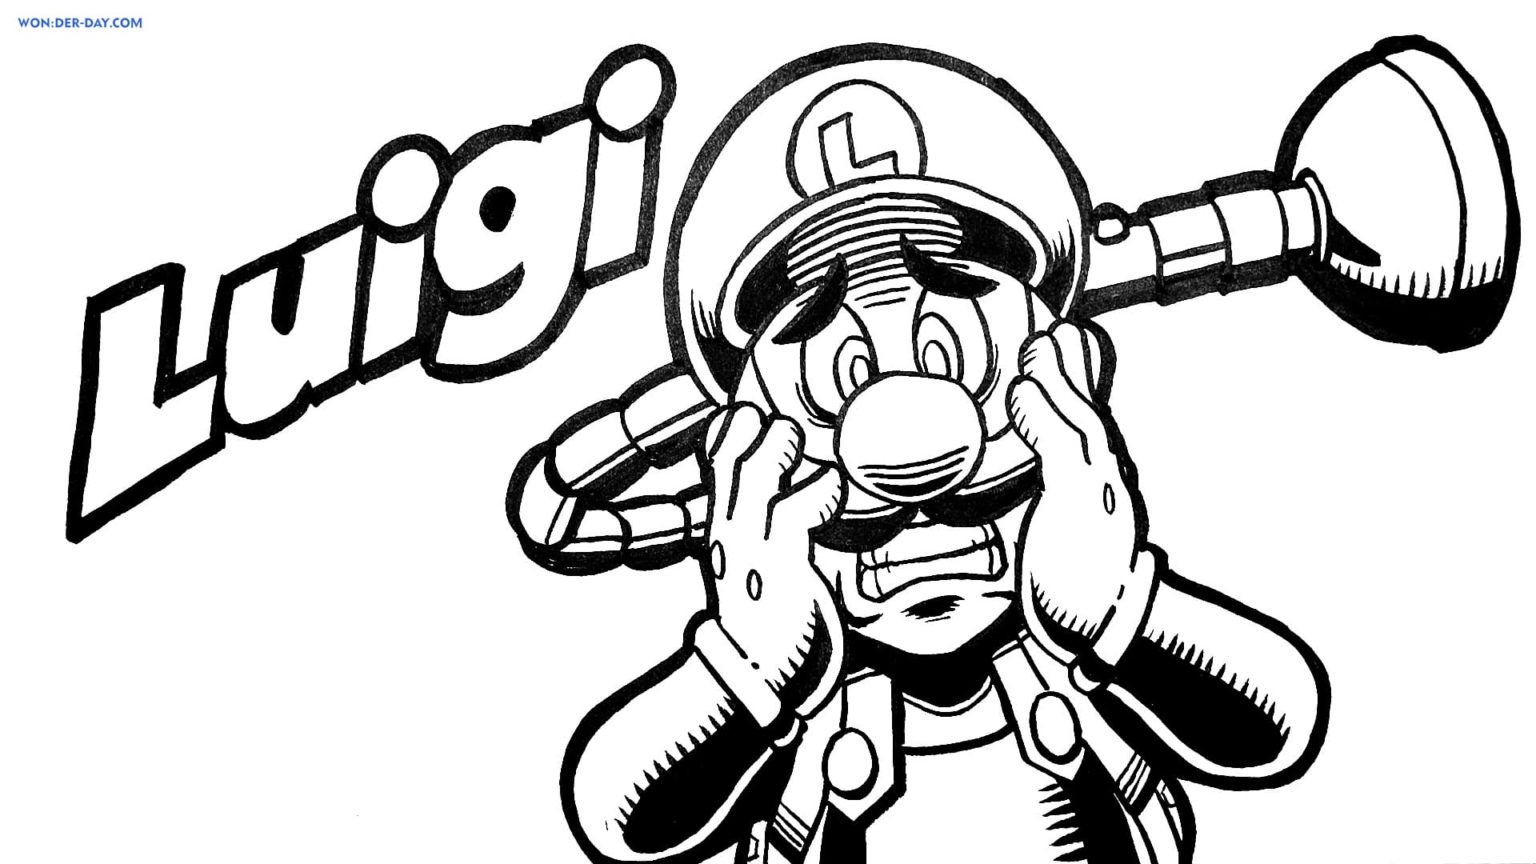 Luigi Manison 3 coloring pages - Free coloring pages